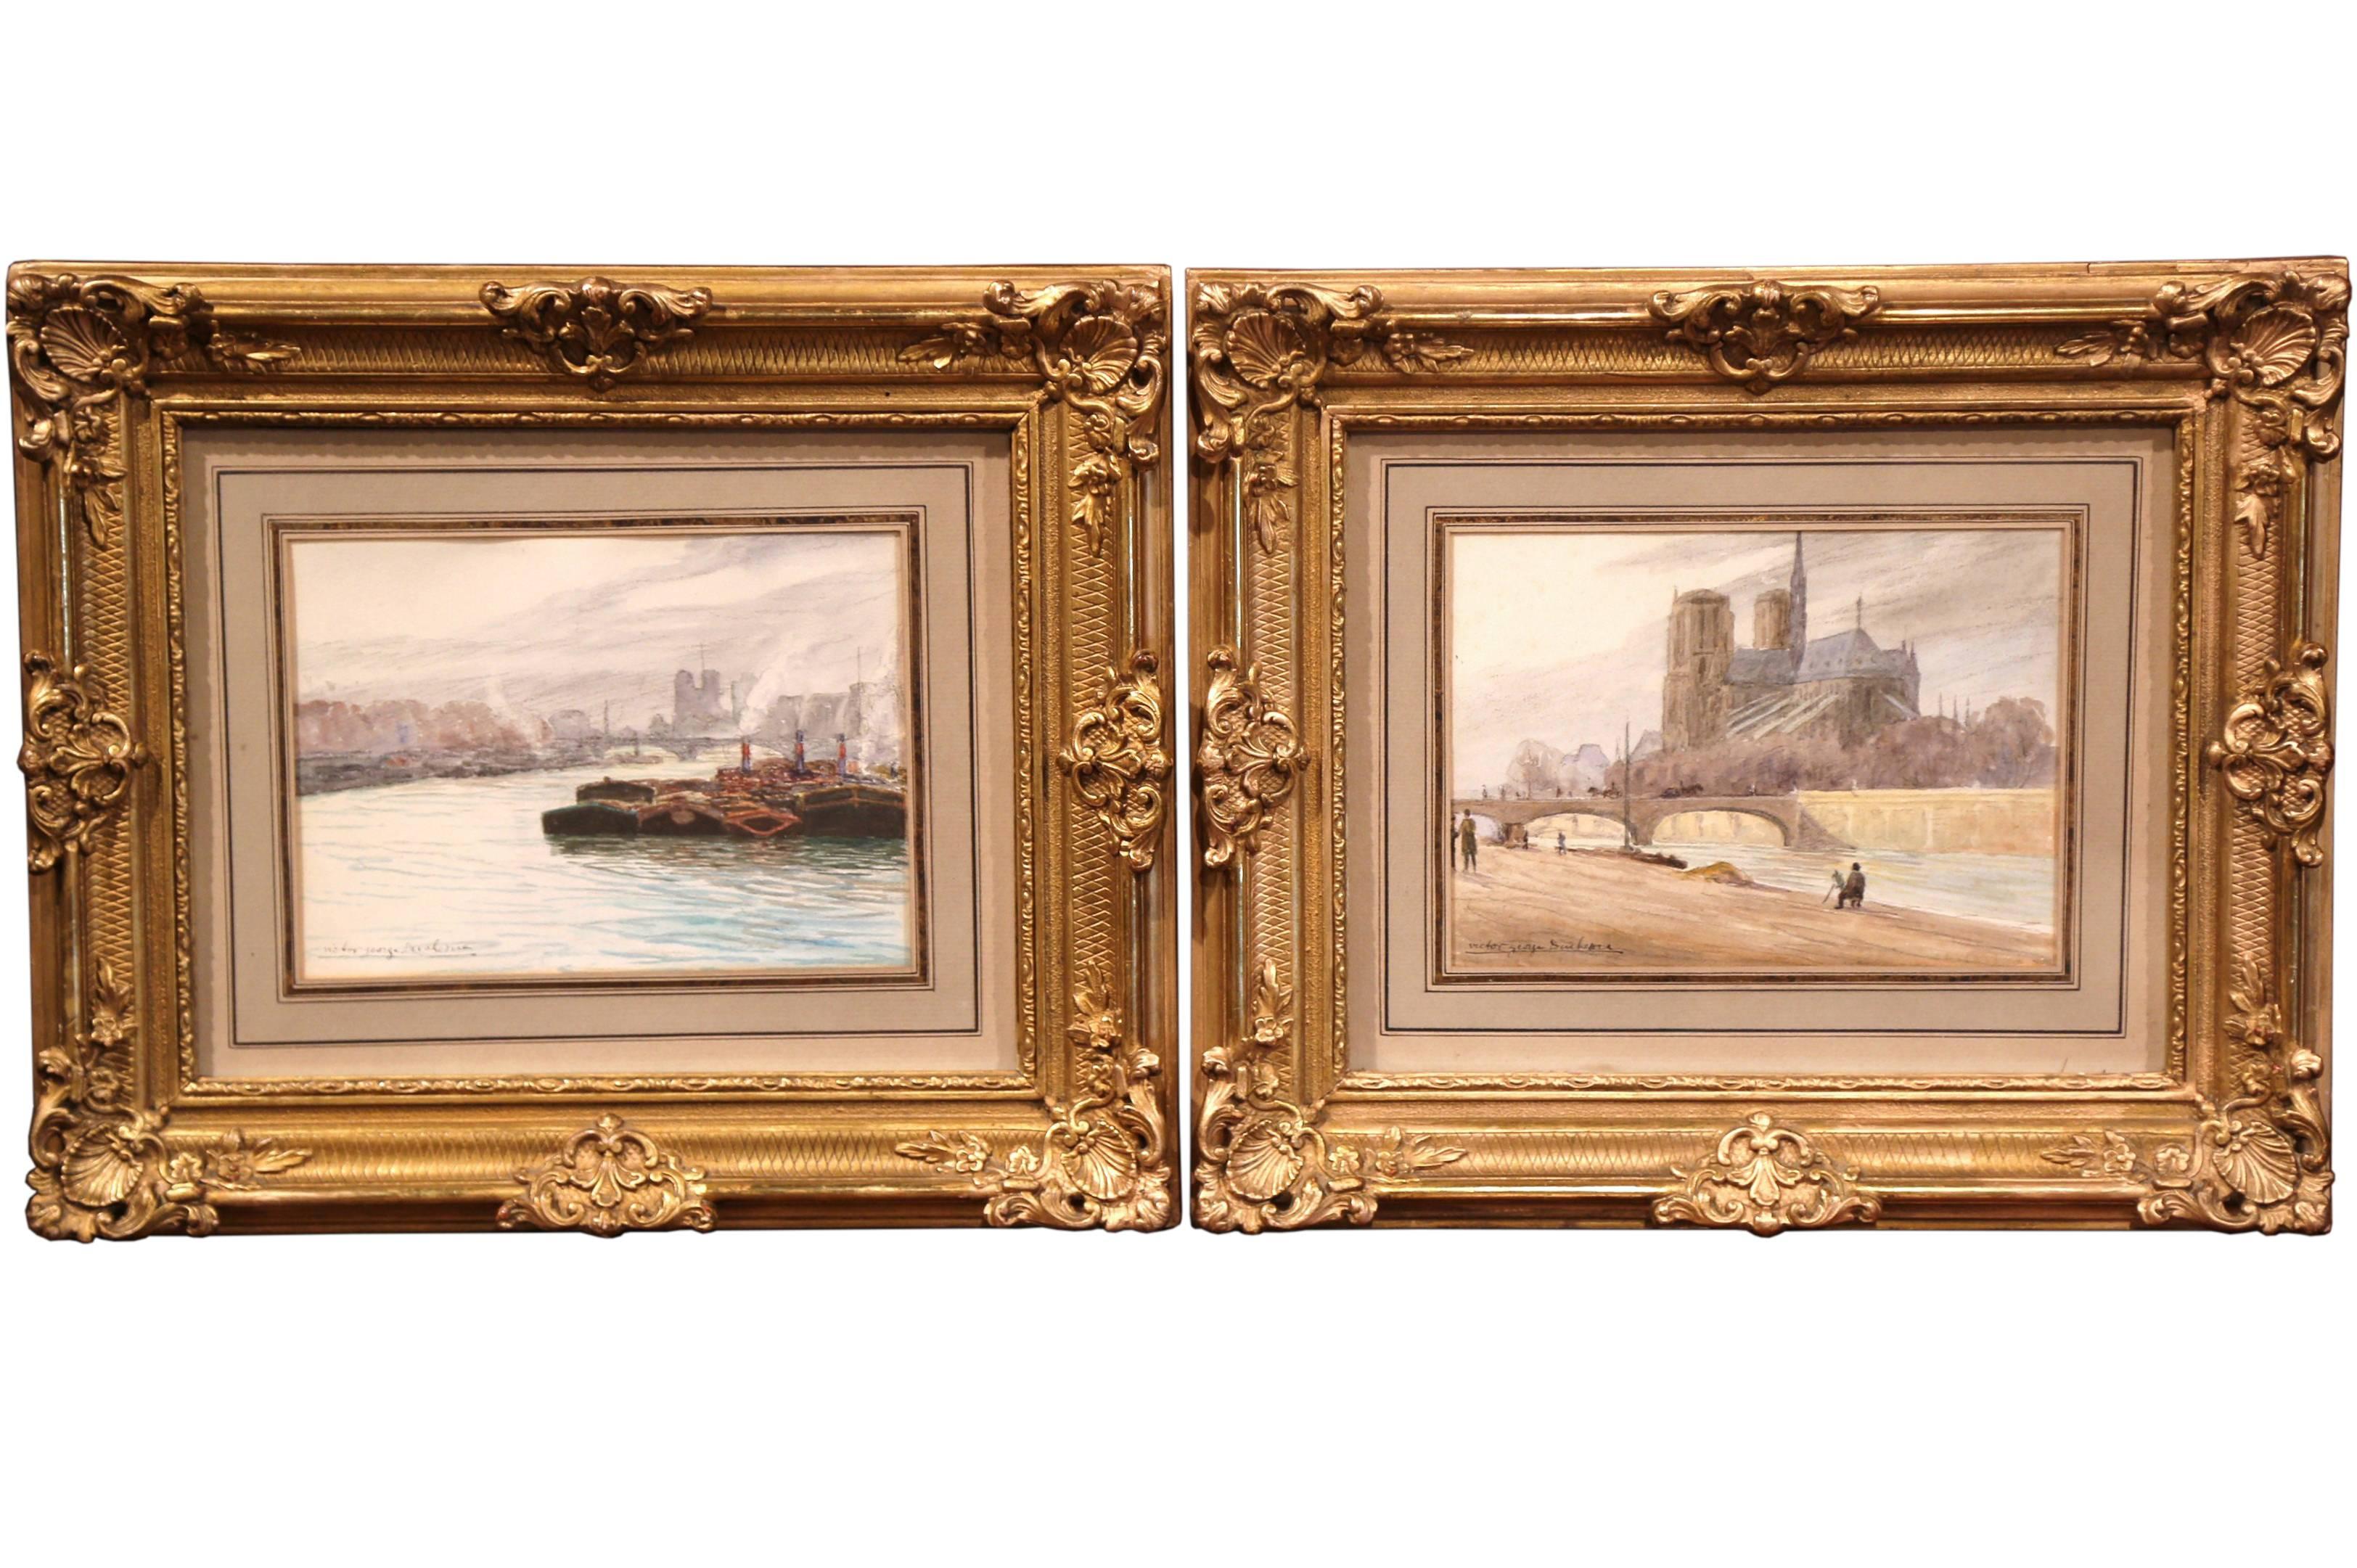 Victor George Duchesne Landscape Art - Pair of 19th Century French Parisian Scenes Watercolors Signed Duchesne